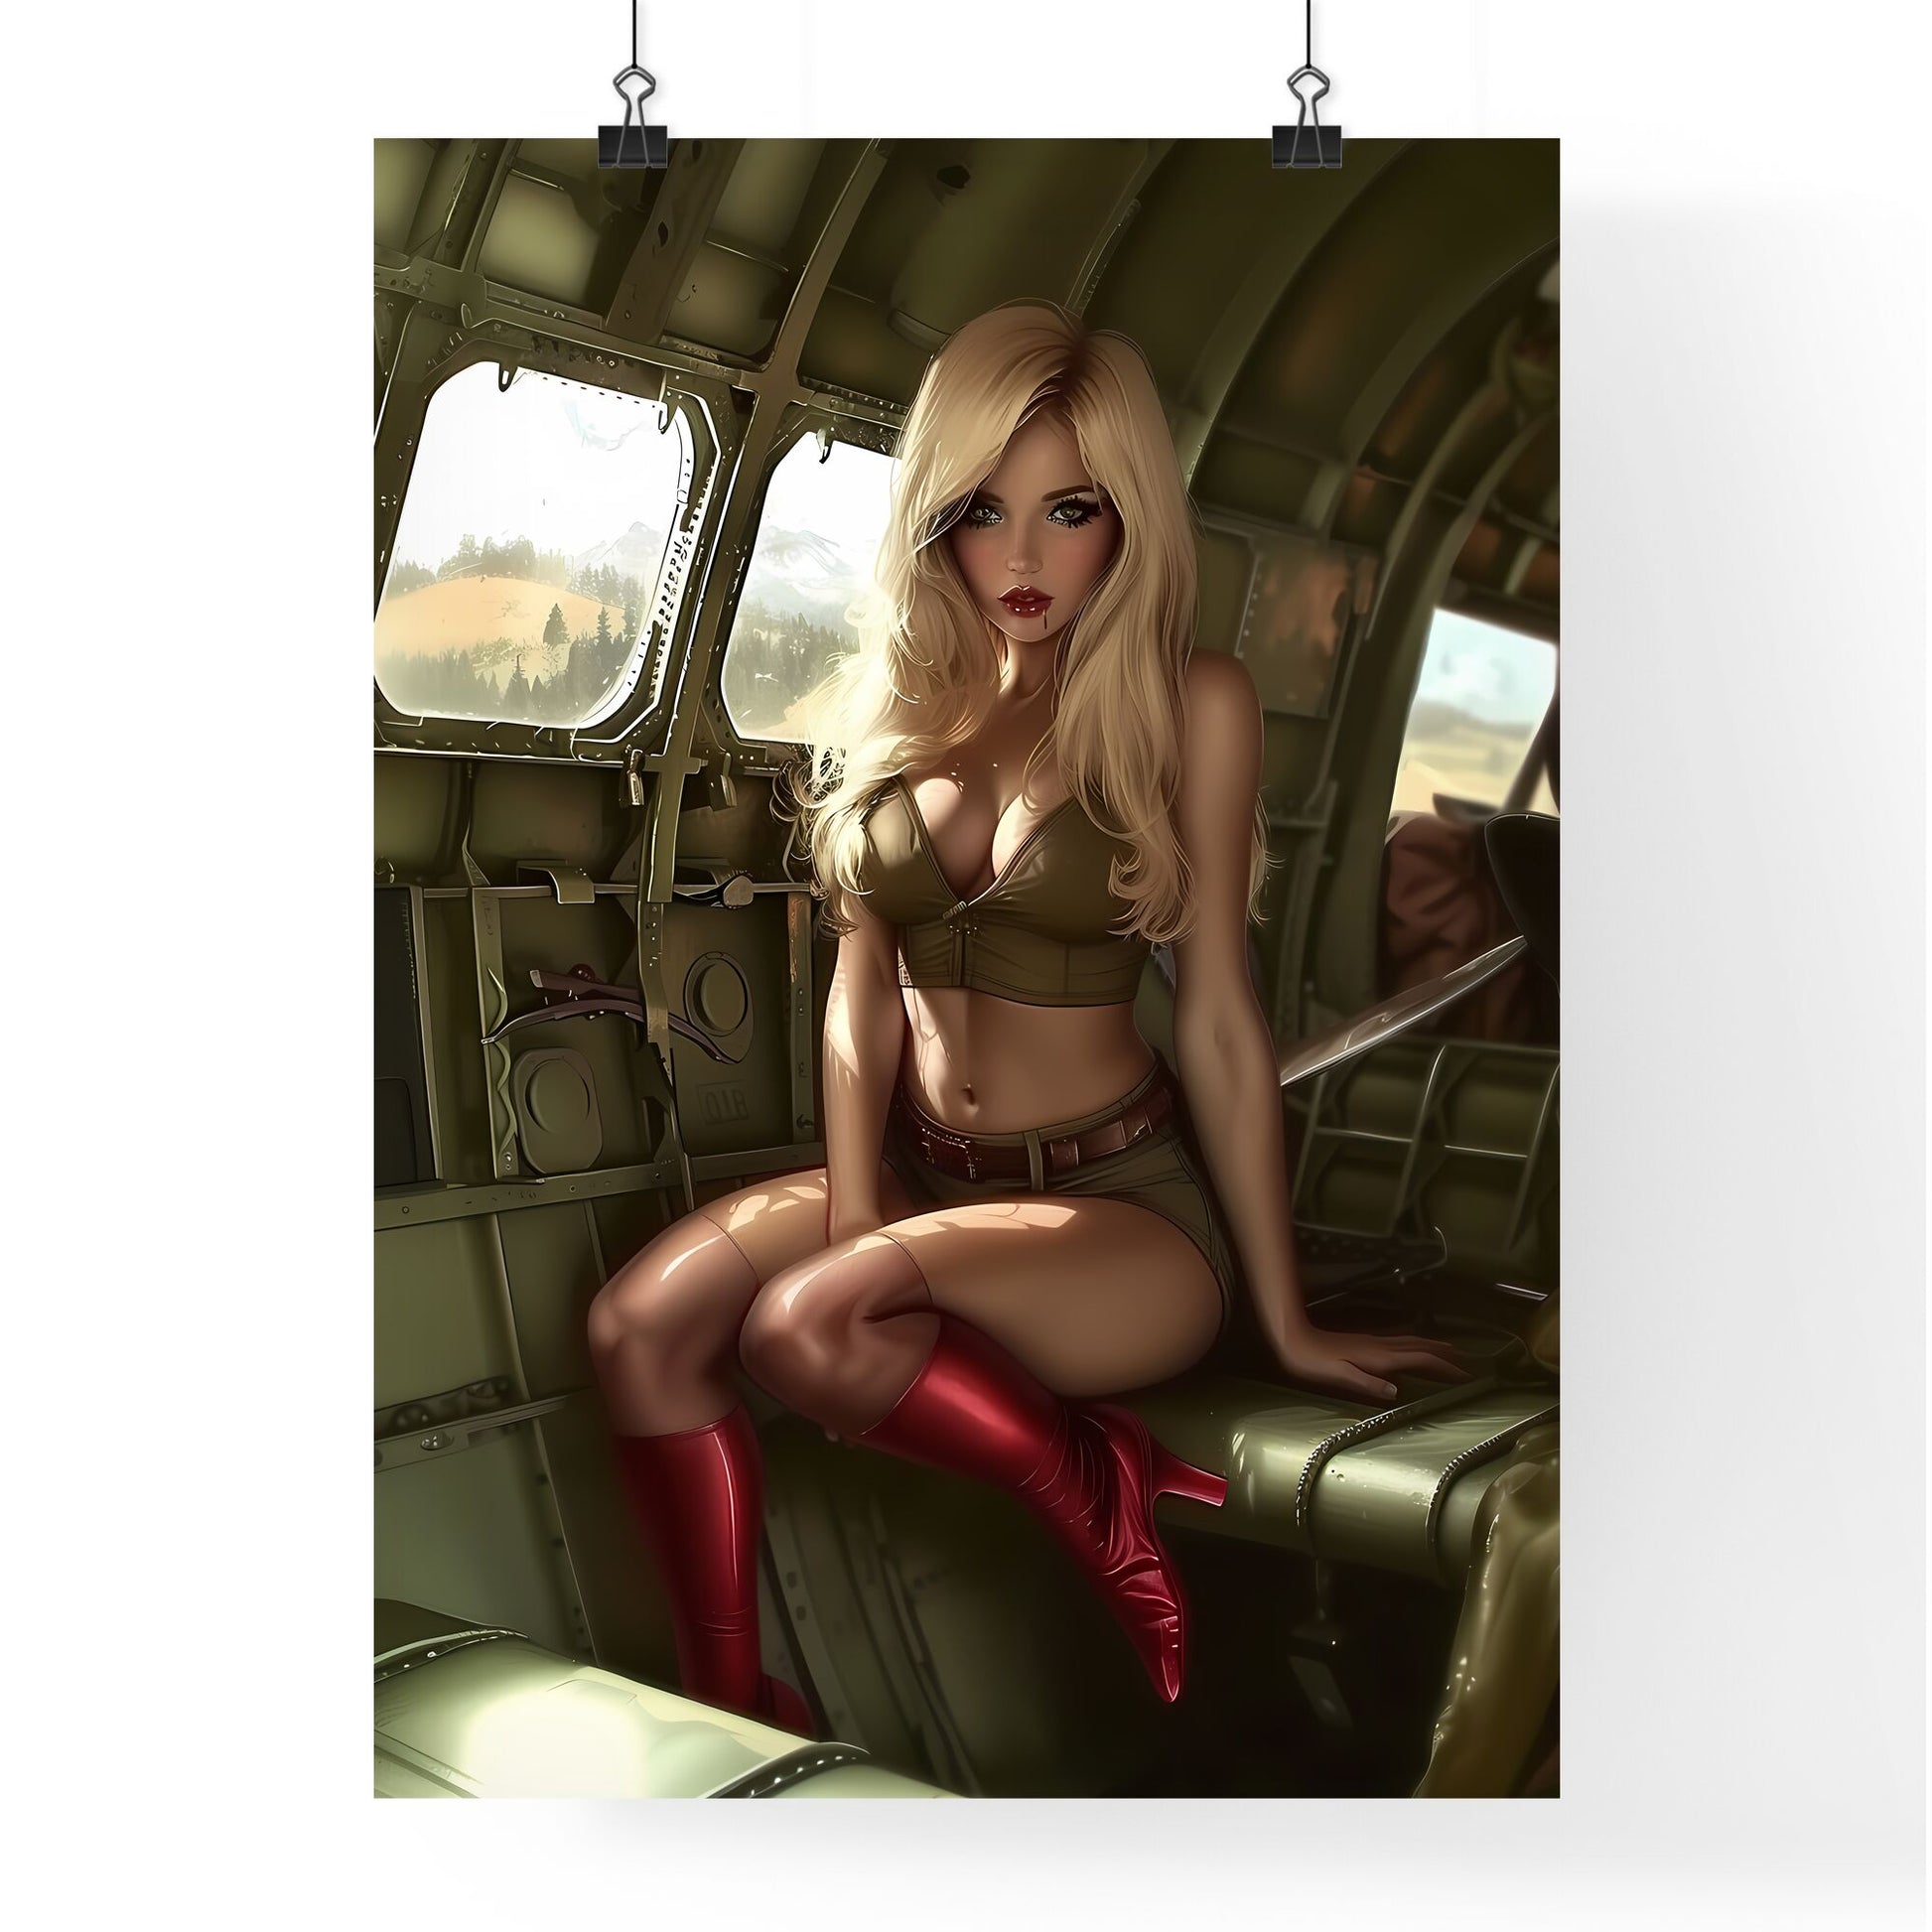 Blonde pin up girl in stockings with red high heels aviation style - Art print of a woman in a military uniform sitting on a green plane Default Title